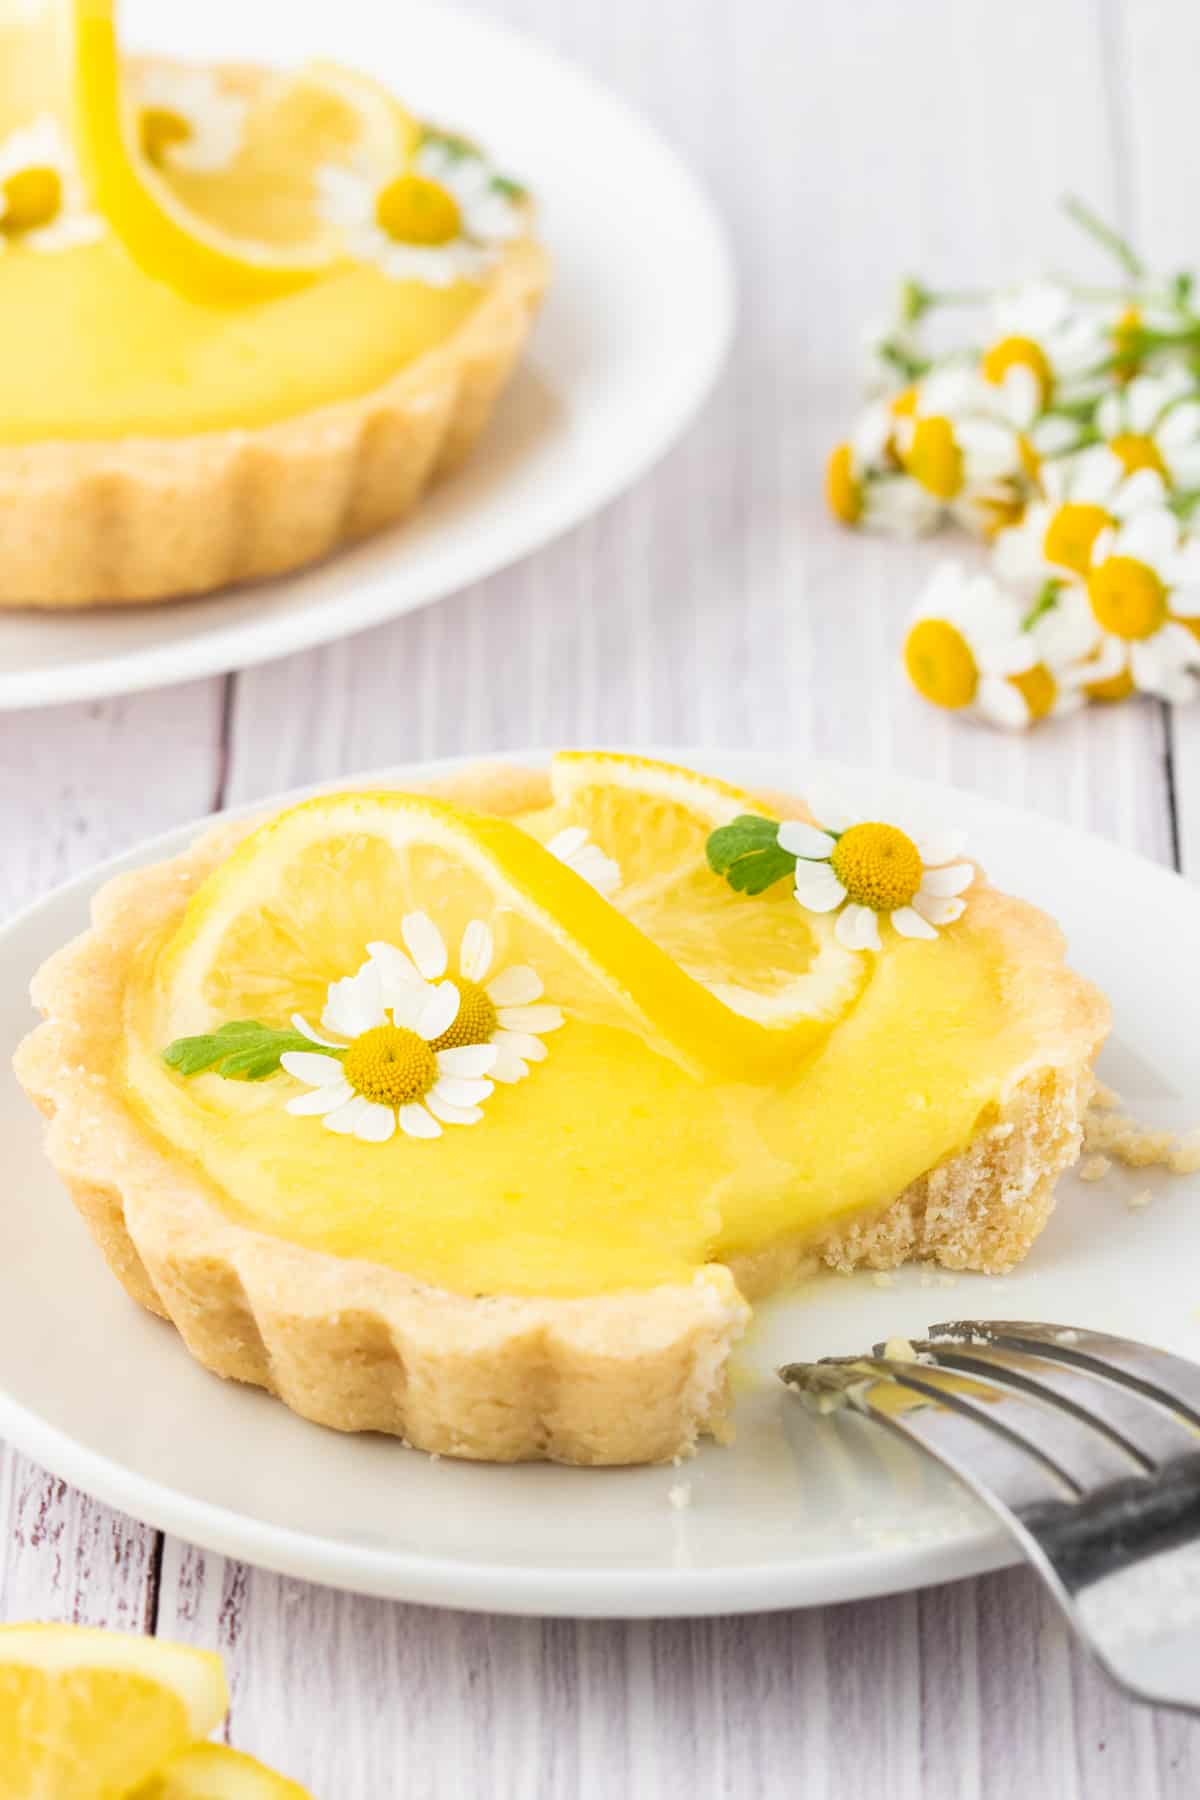 A fork is placed on a white plate next to a mini lemon tart.